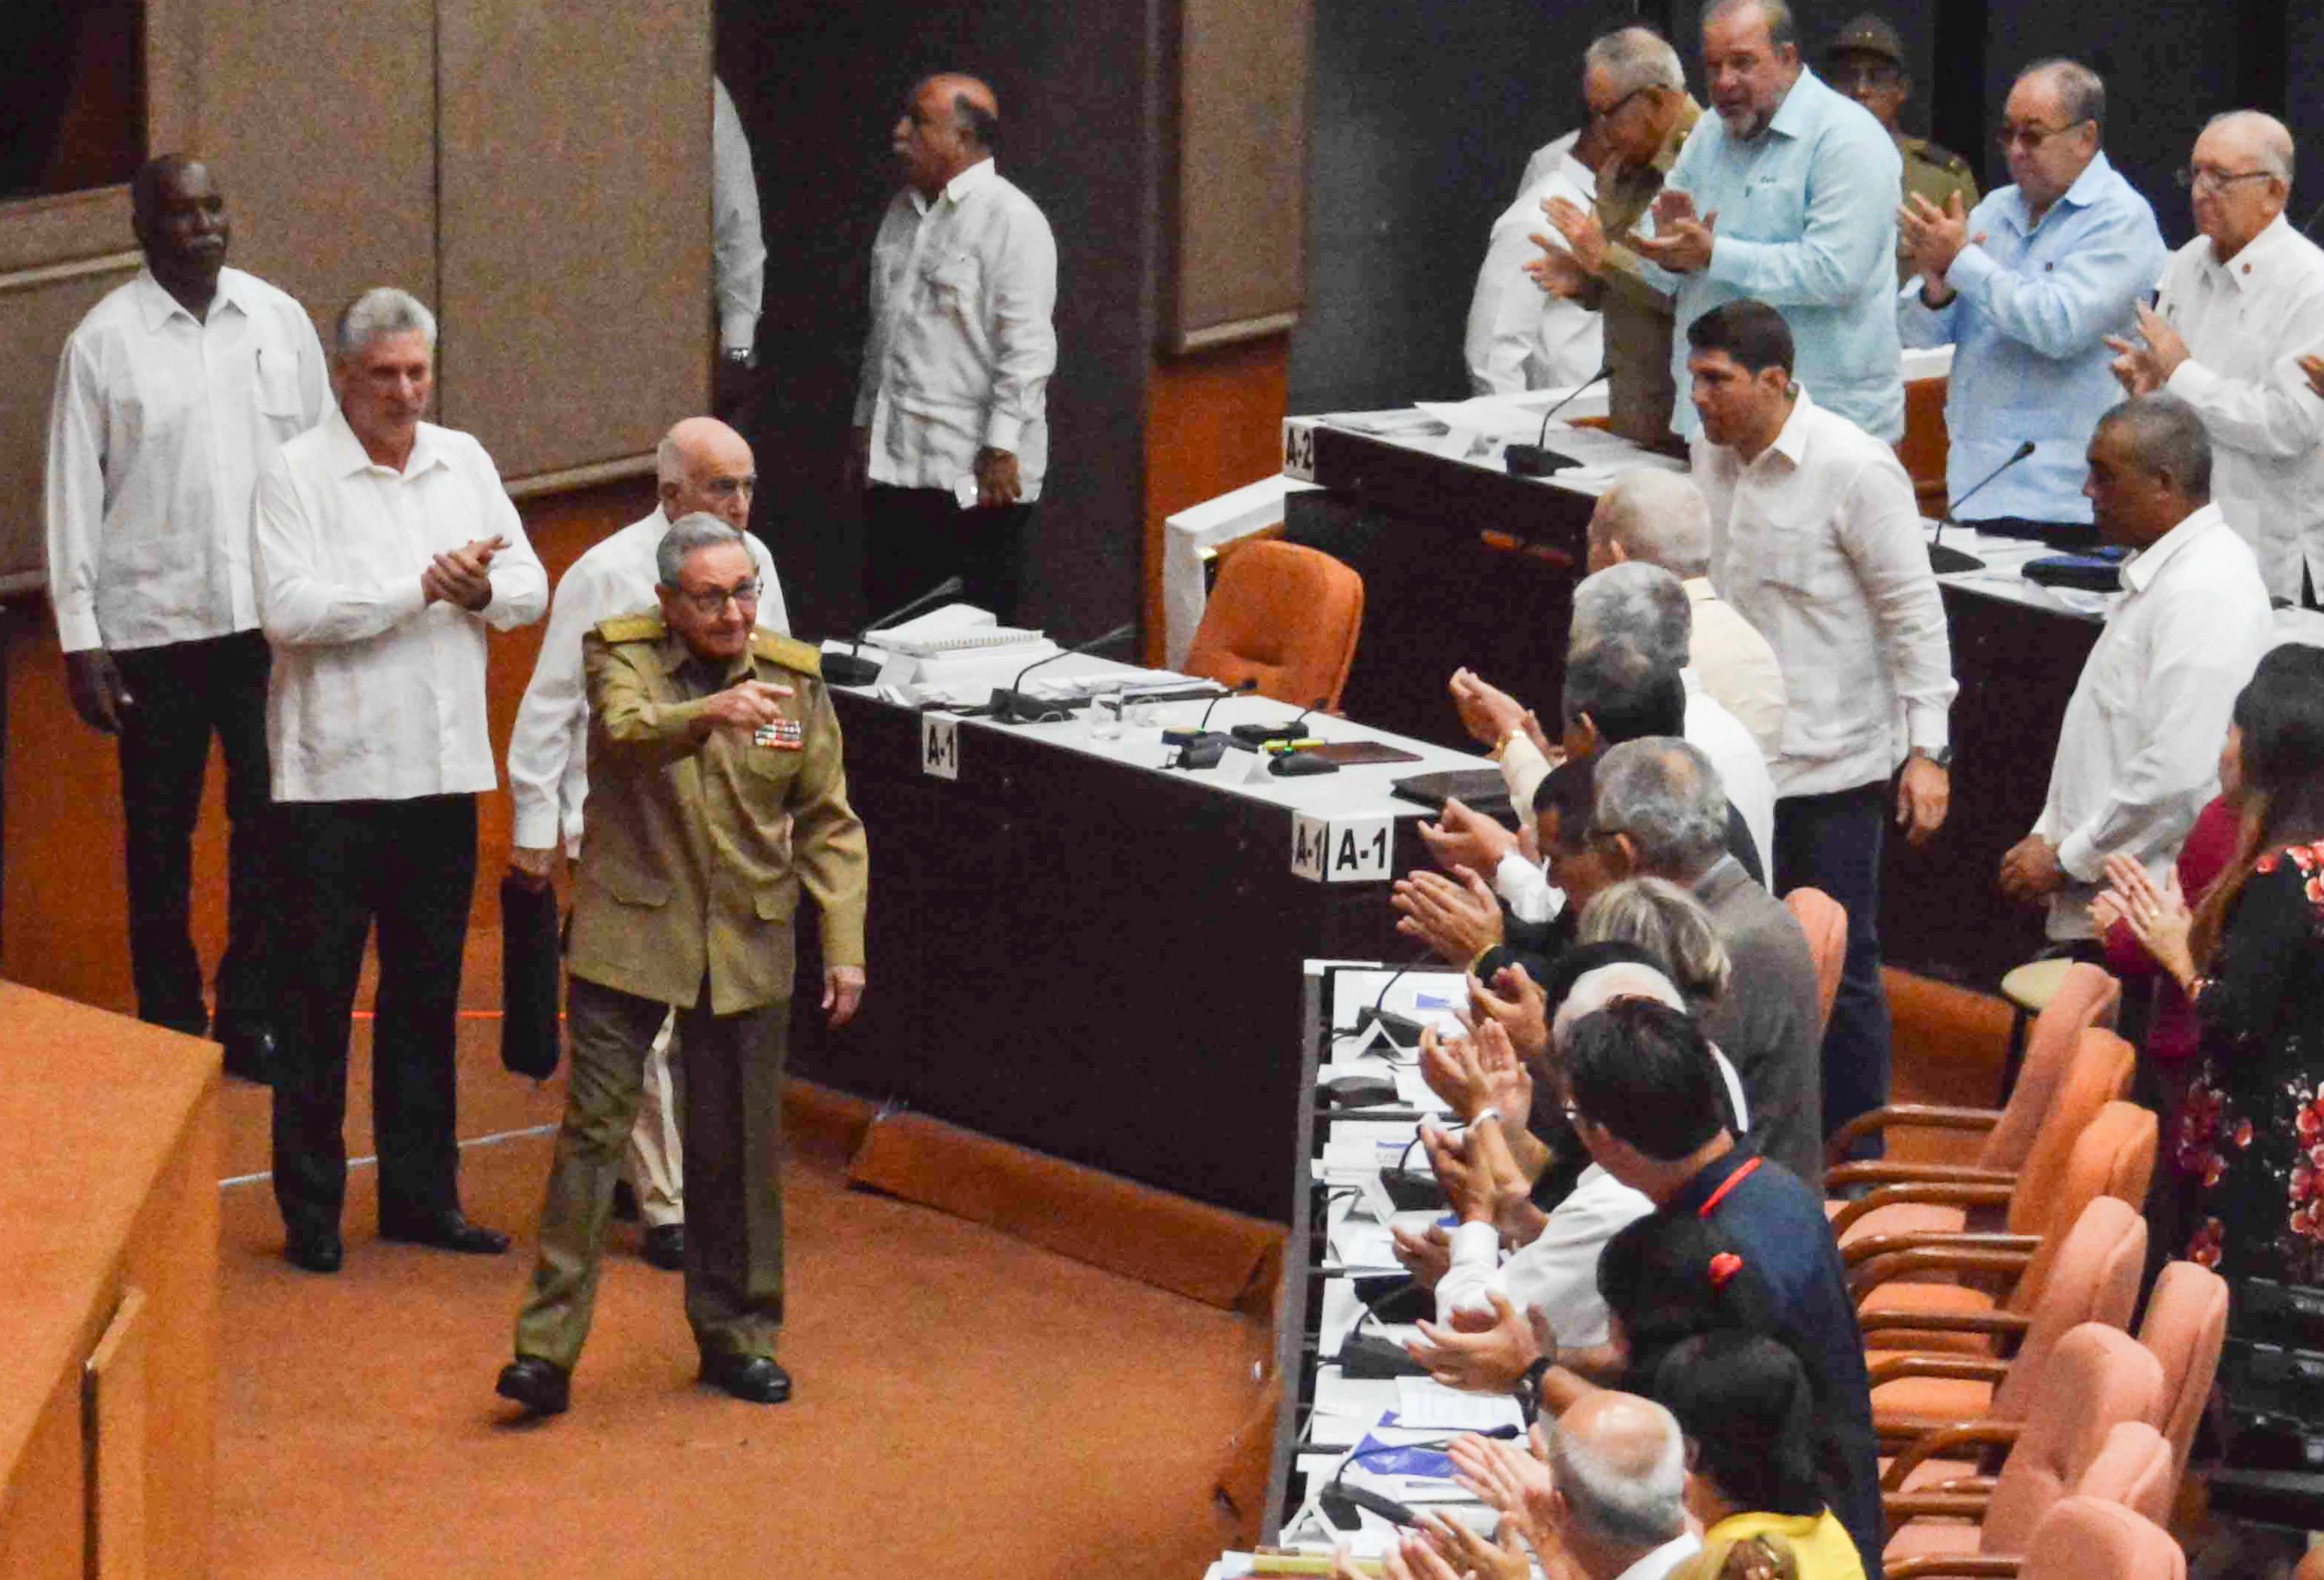 Cuba’s President Miguel Diaz-Canel (second left) applauds as former president Raul Castro arrives at the National Assembly session on July 21, 2018. Photo: AFP